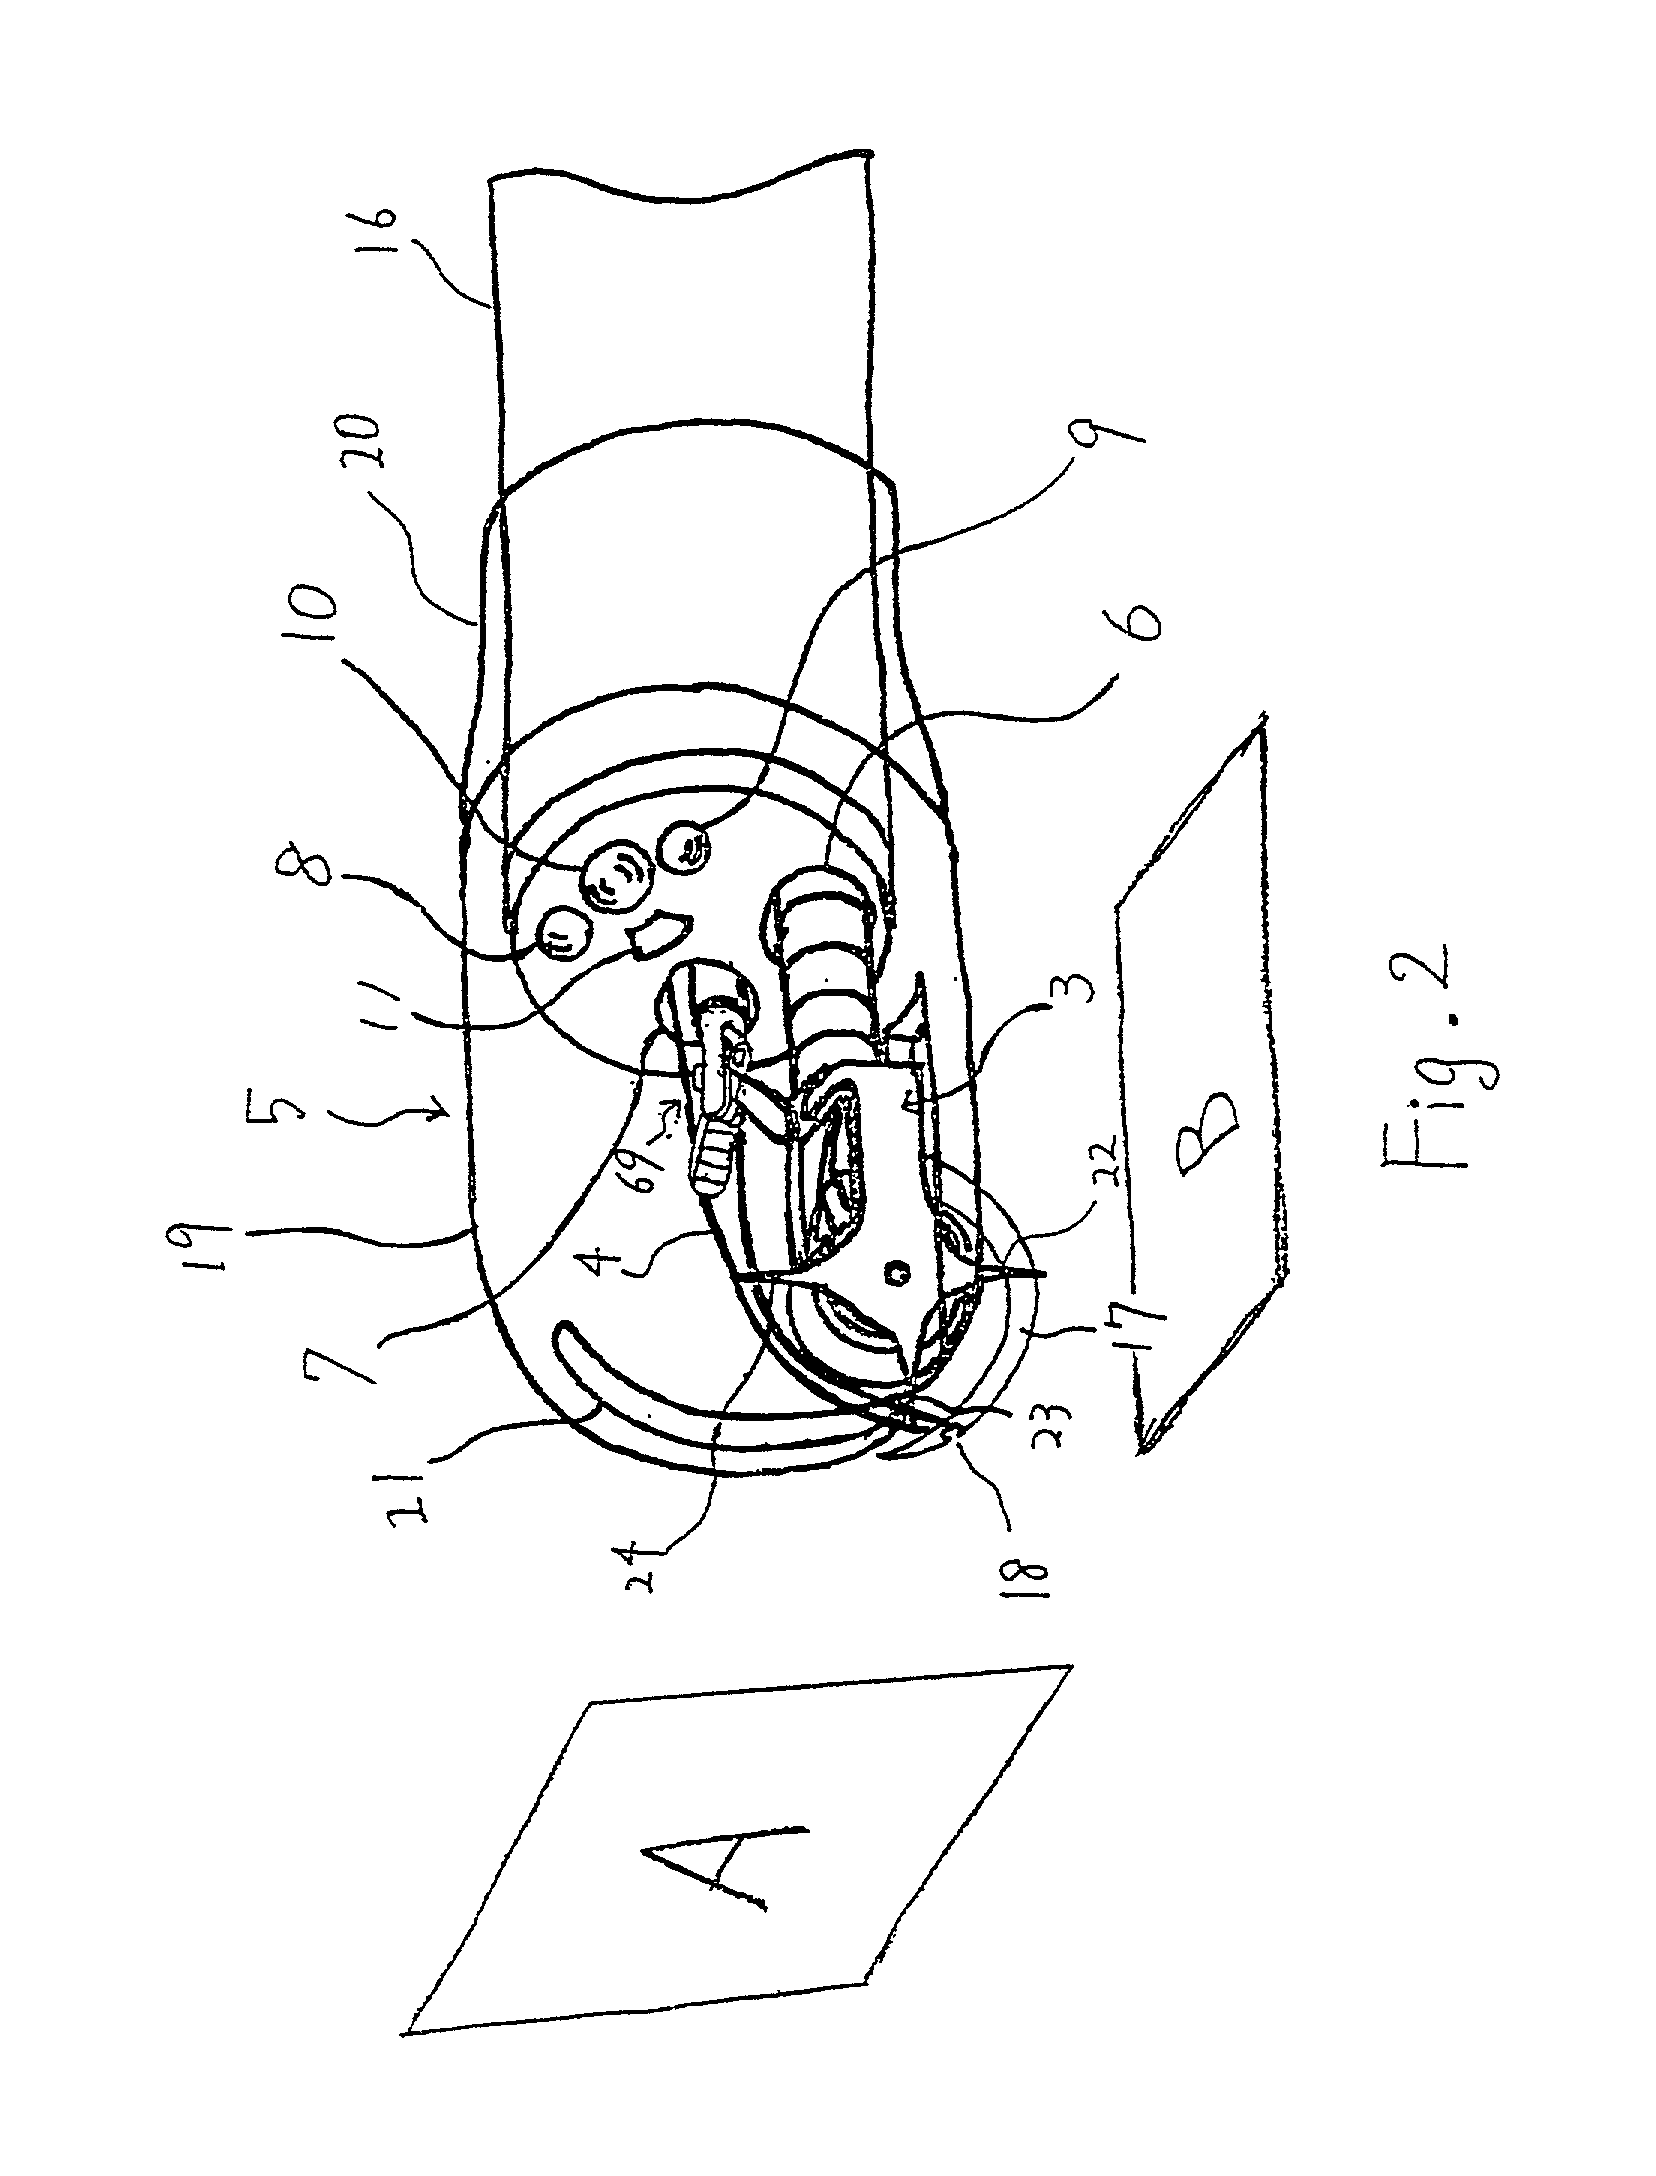 Suturing device for endoscope